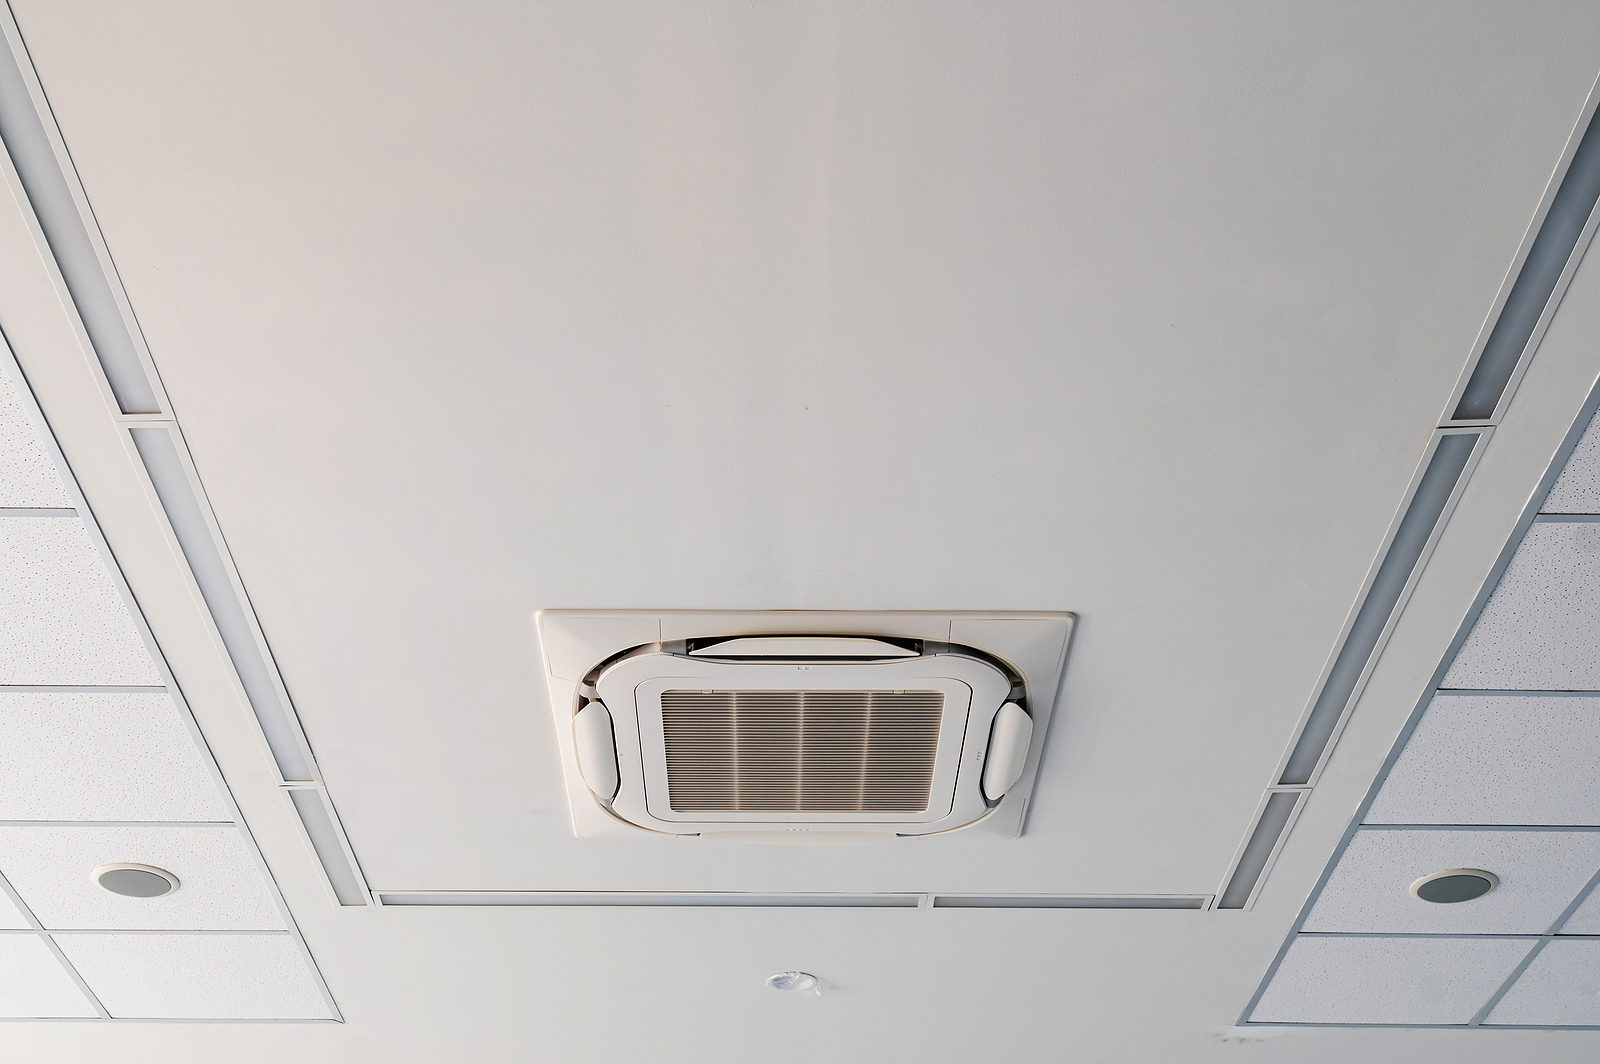 Ceiling Air Conditioning Vents